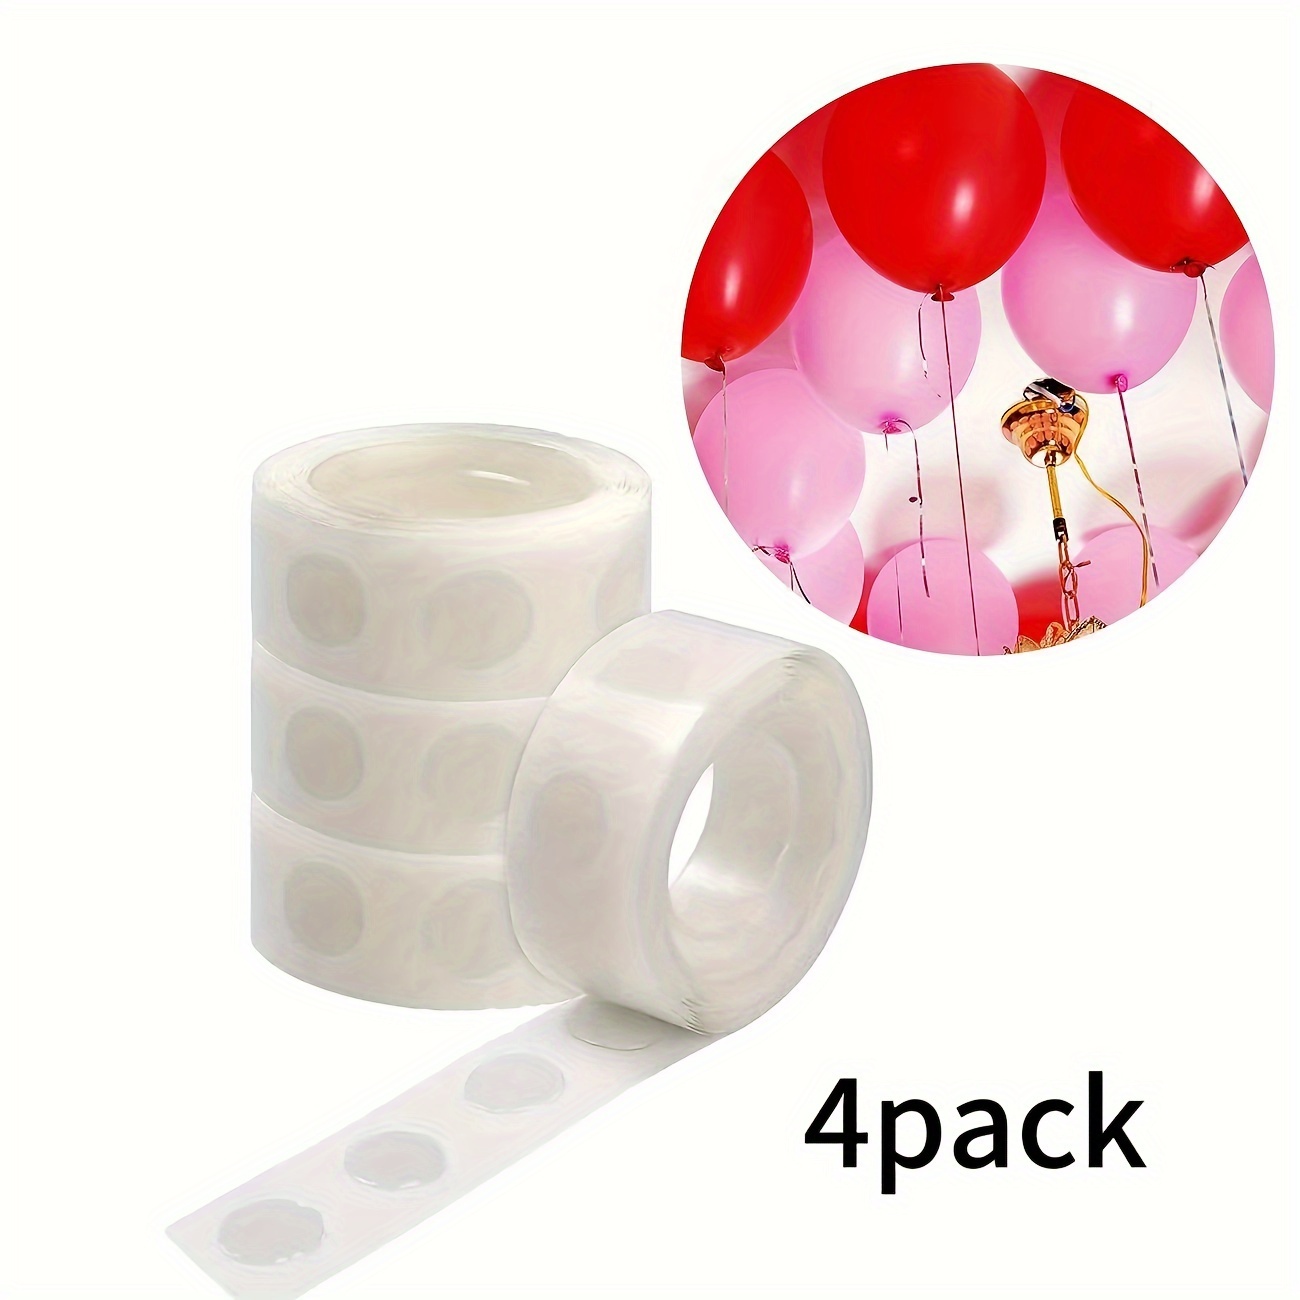 5pcs 100 Sticky Glue Dots For Balloons